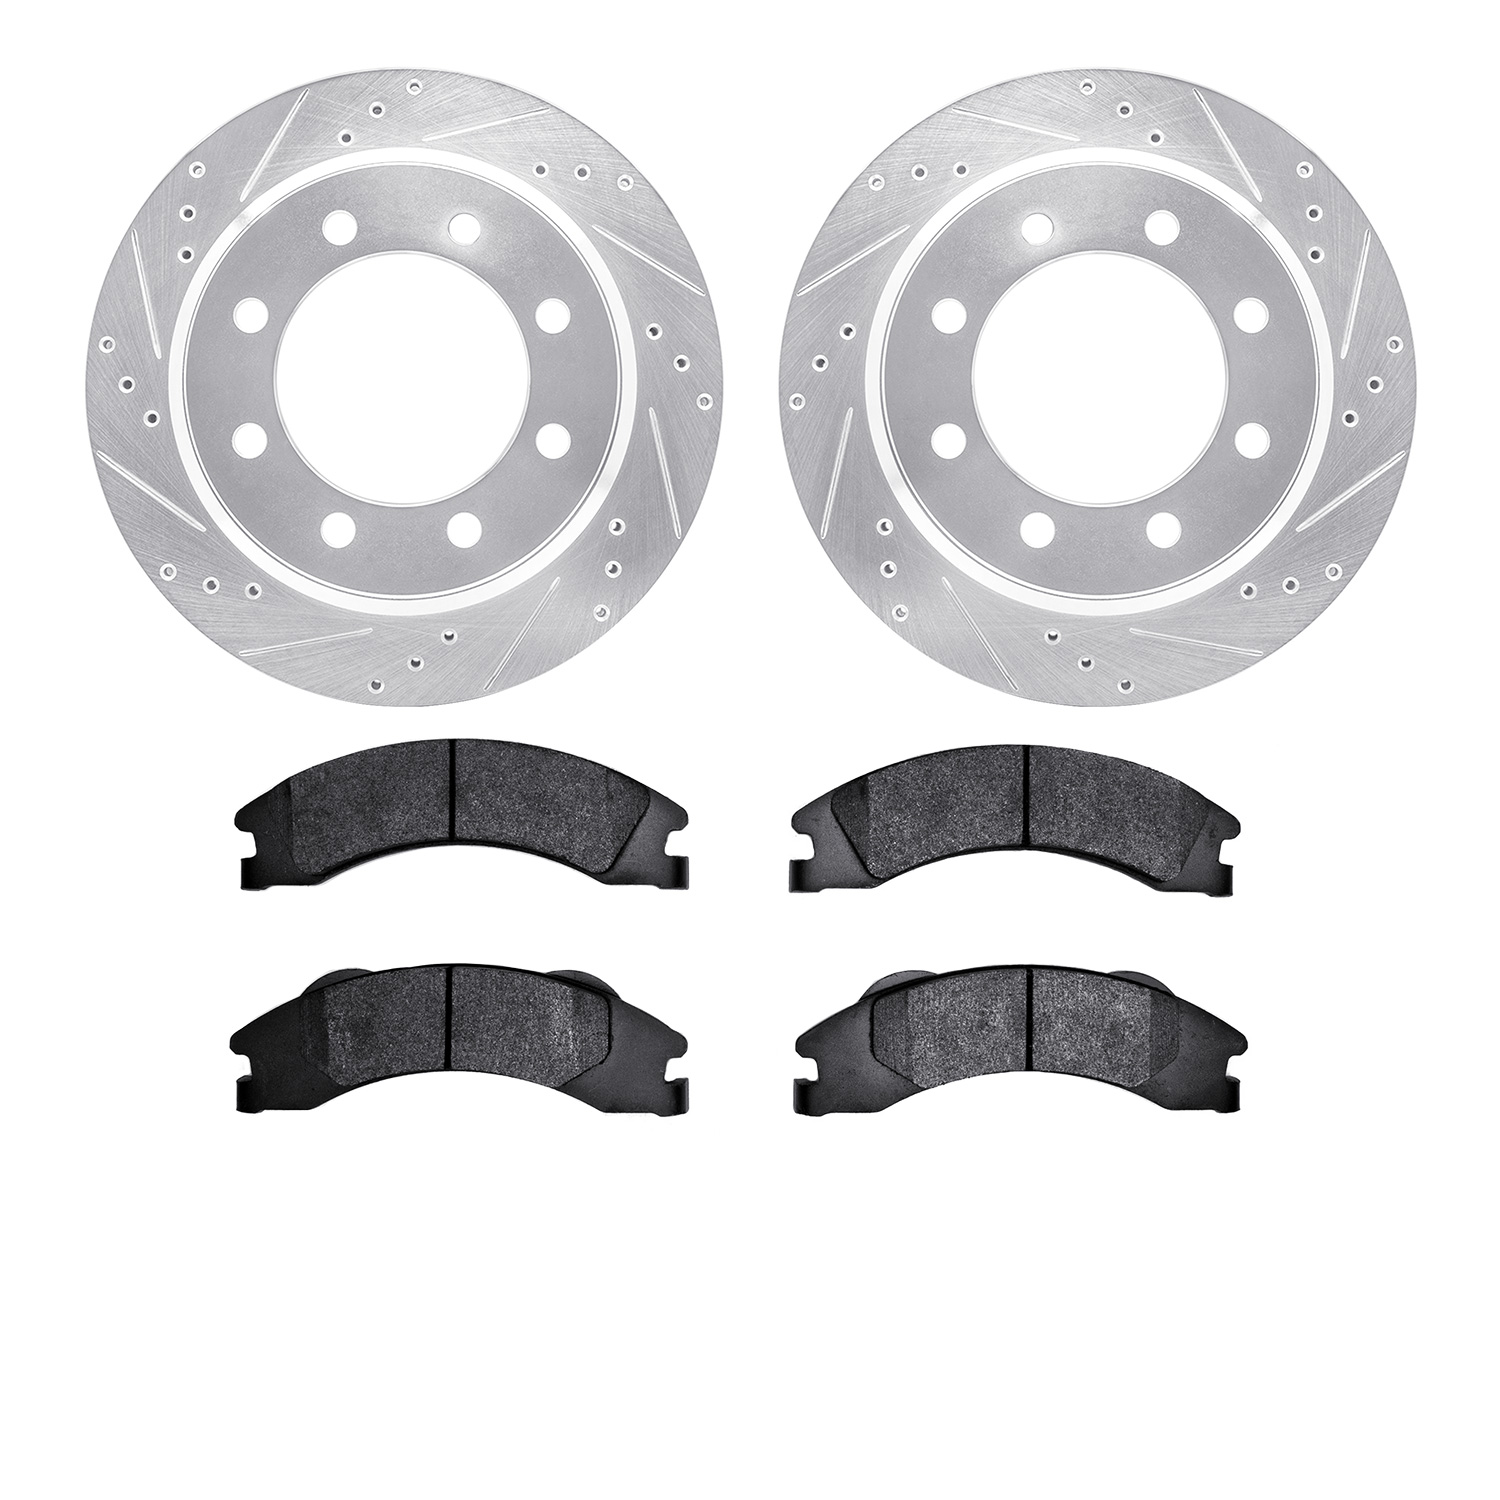 7502-99633 Drilled/Slotted Brake Rotors w/5000 Advanced Brake Pads Kit [Silver], Fits Select Ford/Lincoln/Mercury/Mazda, Positio